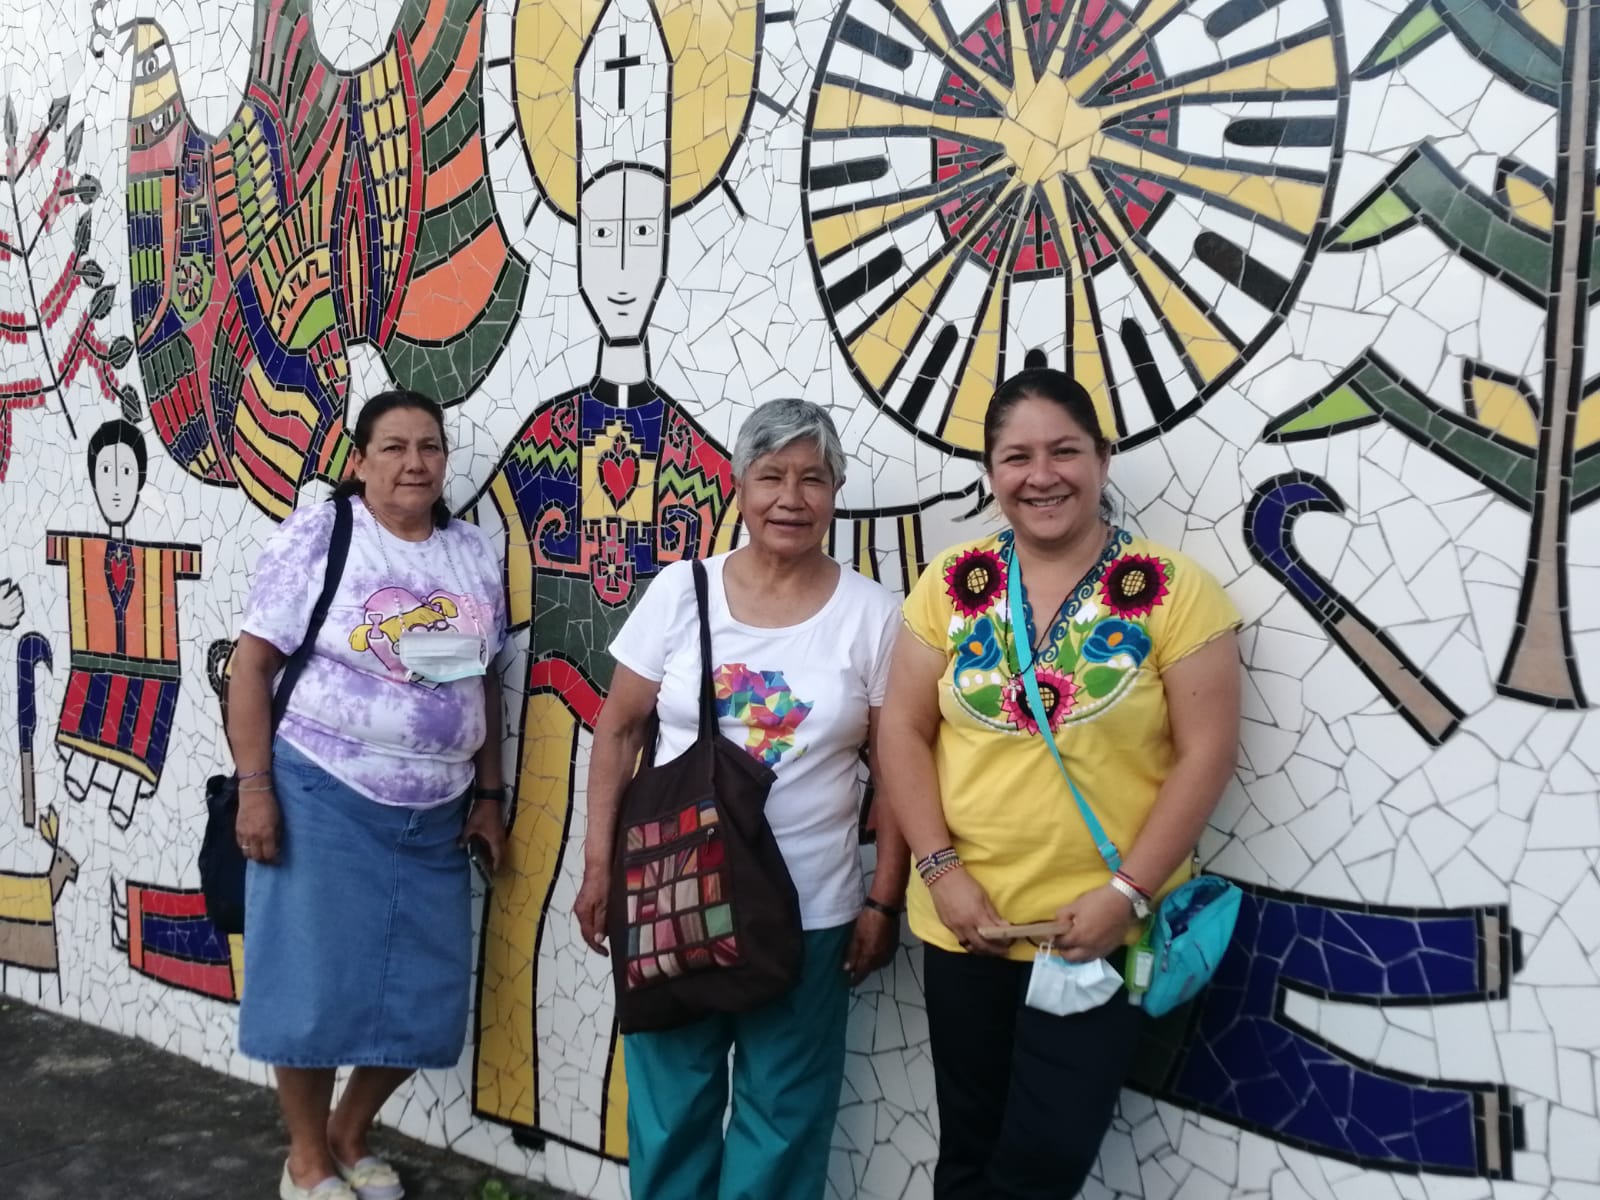 Sr. Zaira Gutierrez, right in yellow shirt, poses for a photo with other Apostolics of the Heart of Jesus, in front of art depicting St. Oscar Romero in San Salvador in November 2022. She said the life of St. Romero influenced her vocation and commitment to the poor. (Courtesy of Apostolics of the Heart of Jesus) 